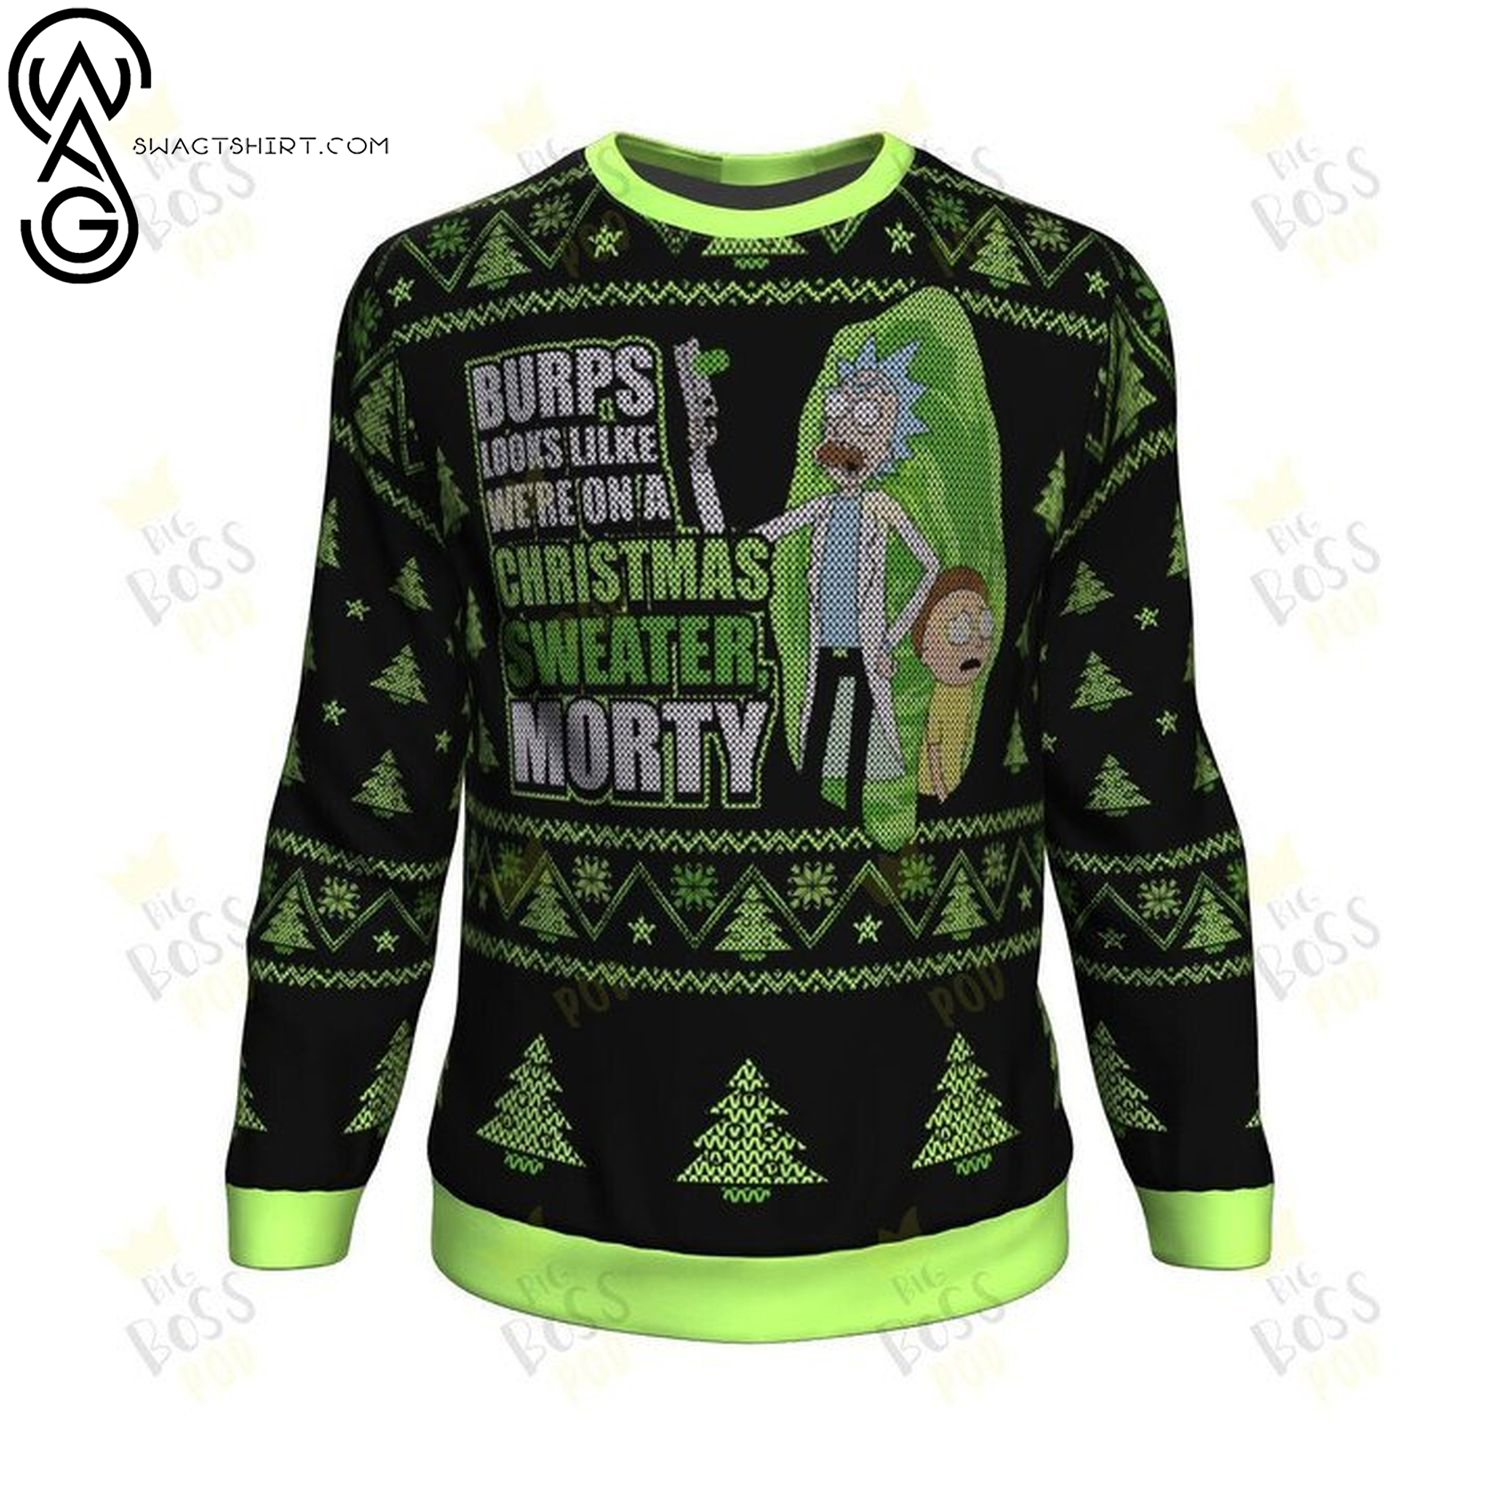 Rick and morty burps look like we're on a christmas sweater ugly christmas sweater